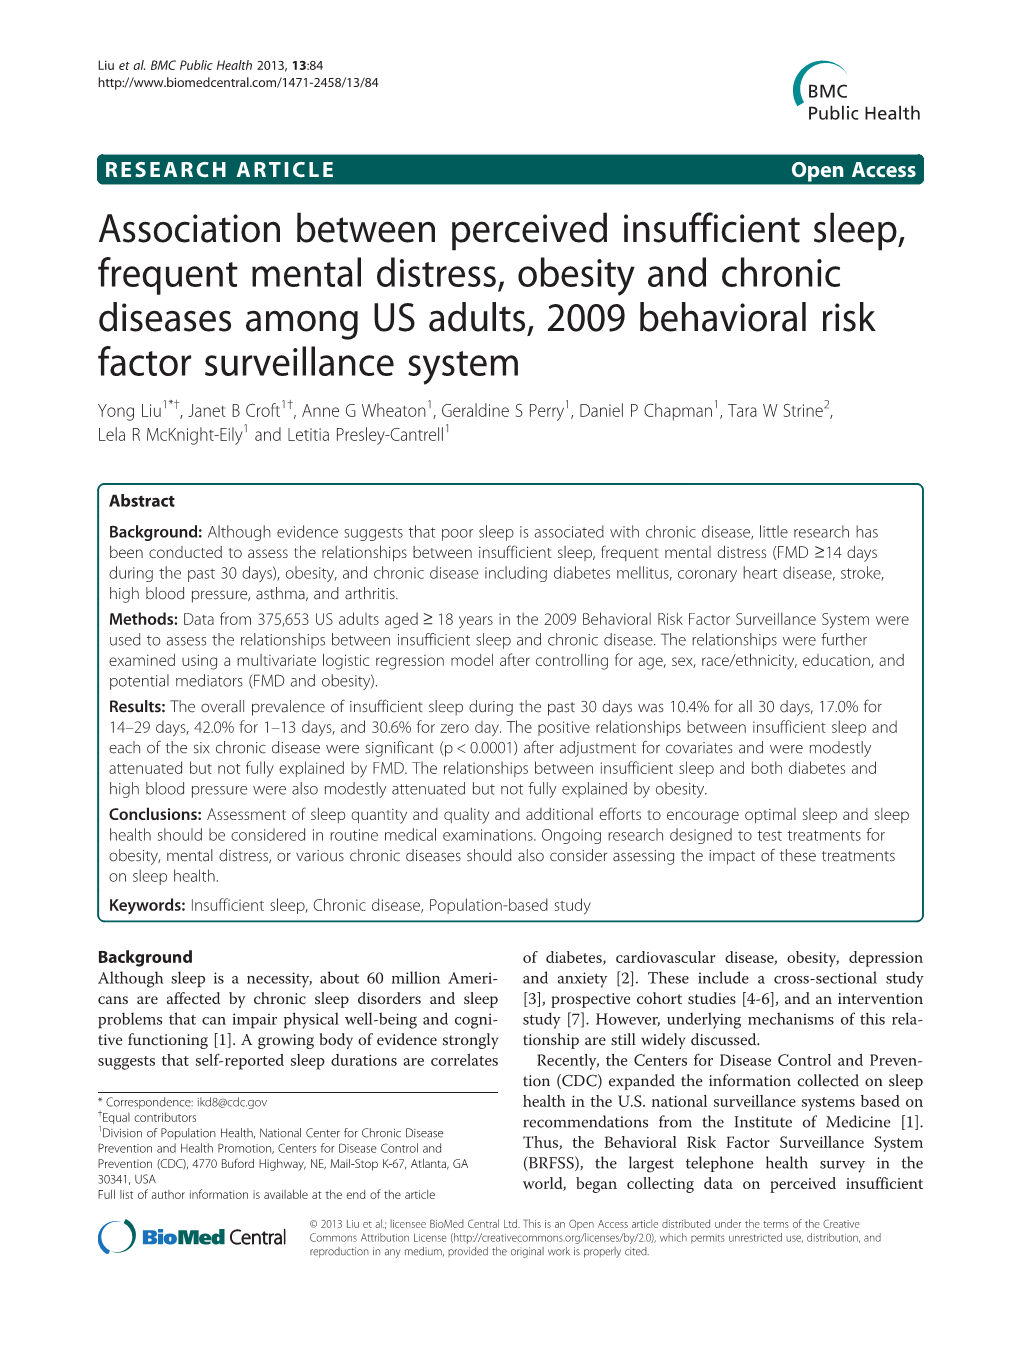 Association Between Perceived Insufficient Sleep, Frequent Mental Distress, Obesity and Chronic Diseases Among US Adults, 2009 Behavioral Risk Factor Surveillance System